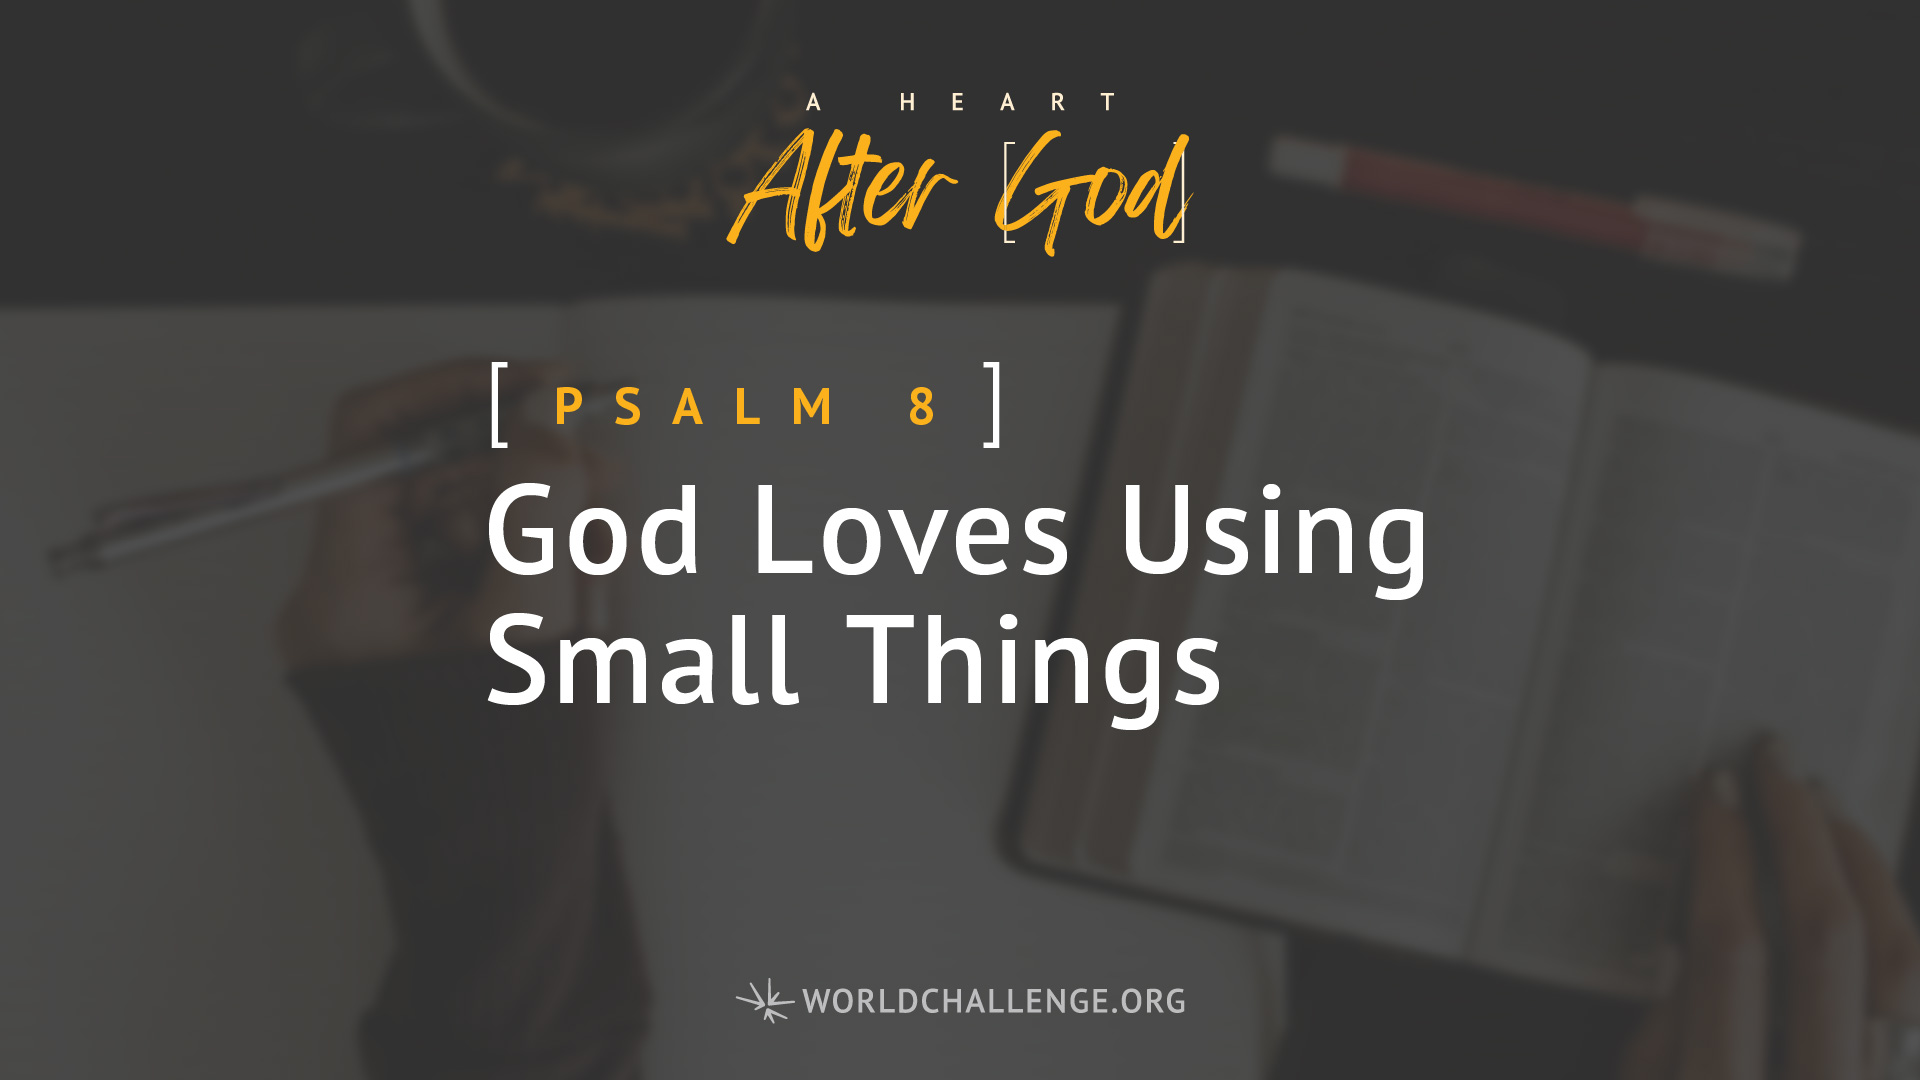 Psalm 8 - God Loves Using Small Things